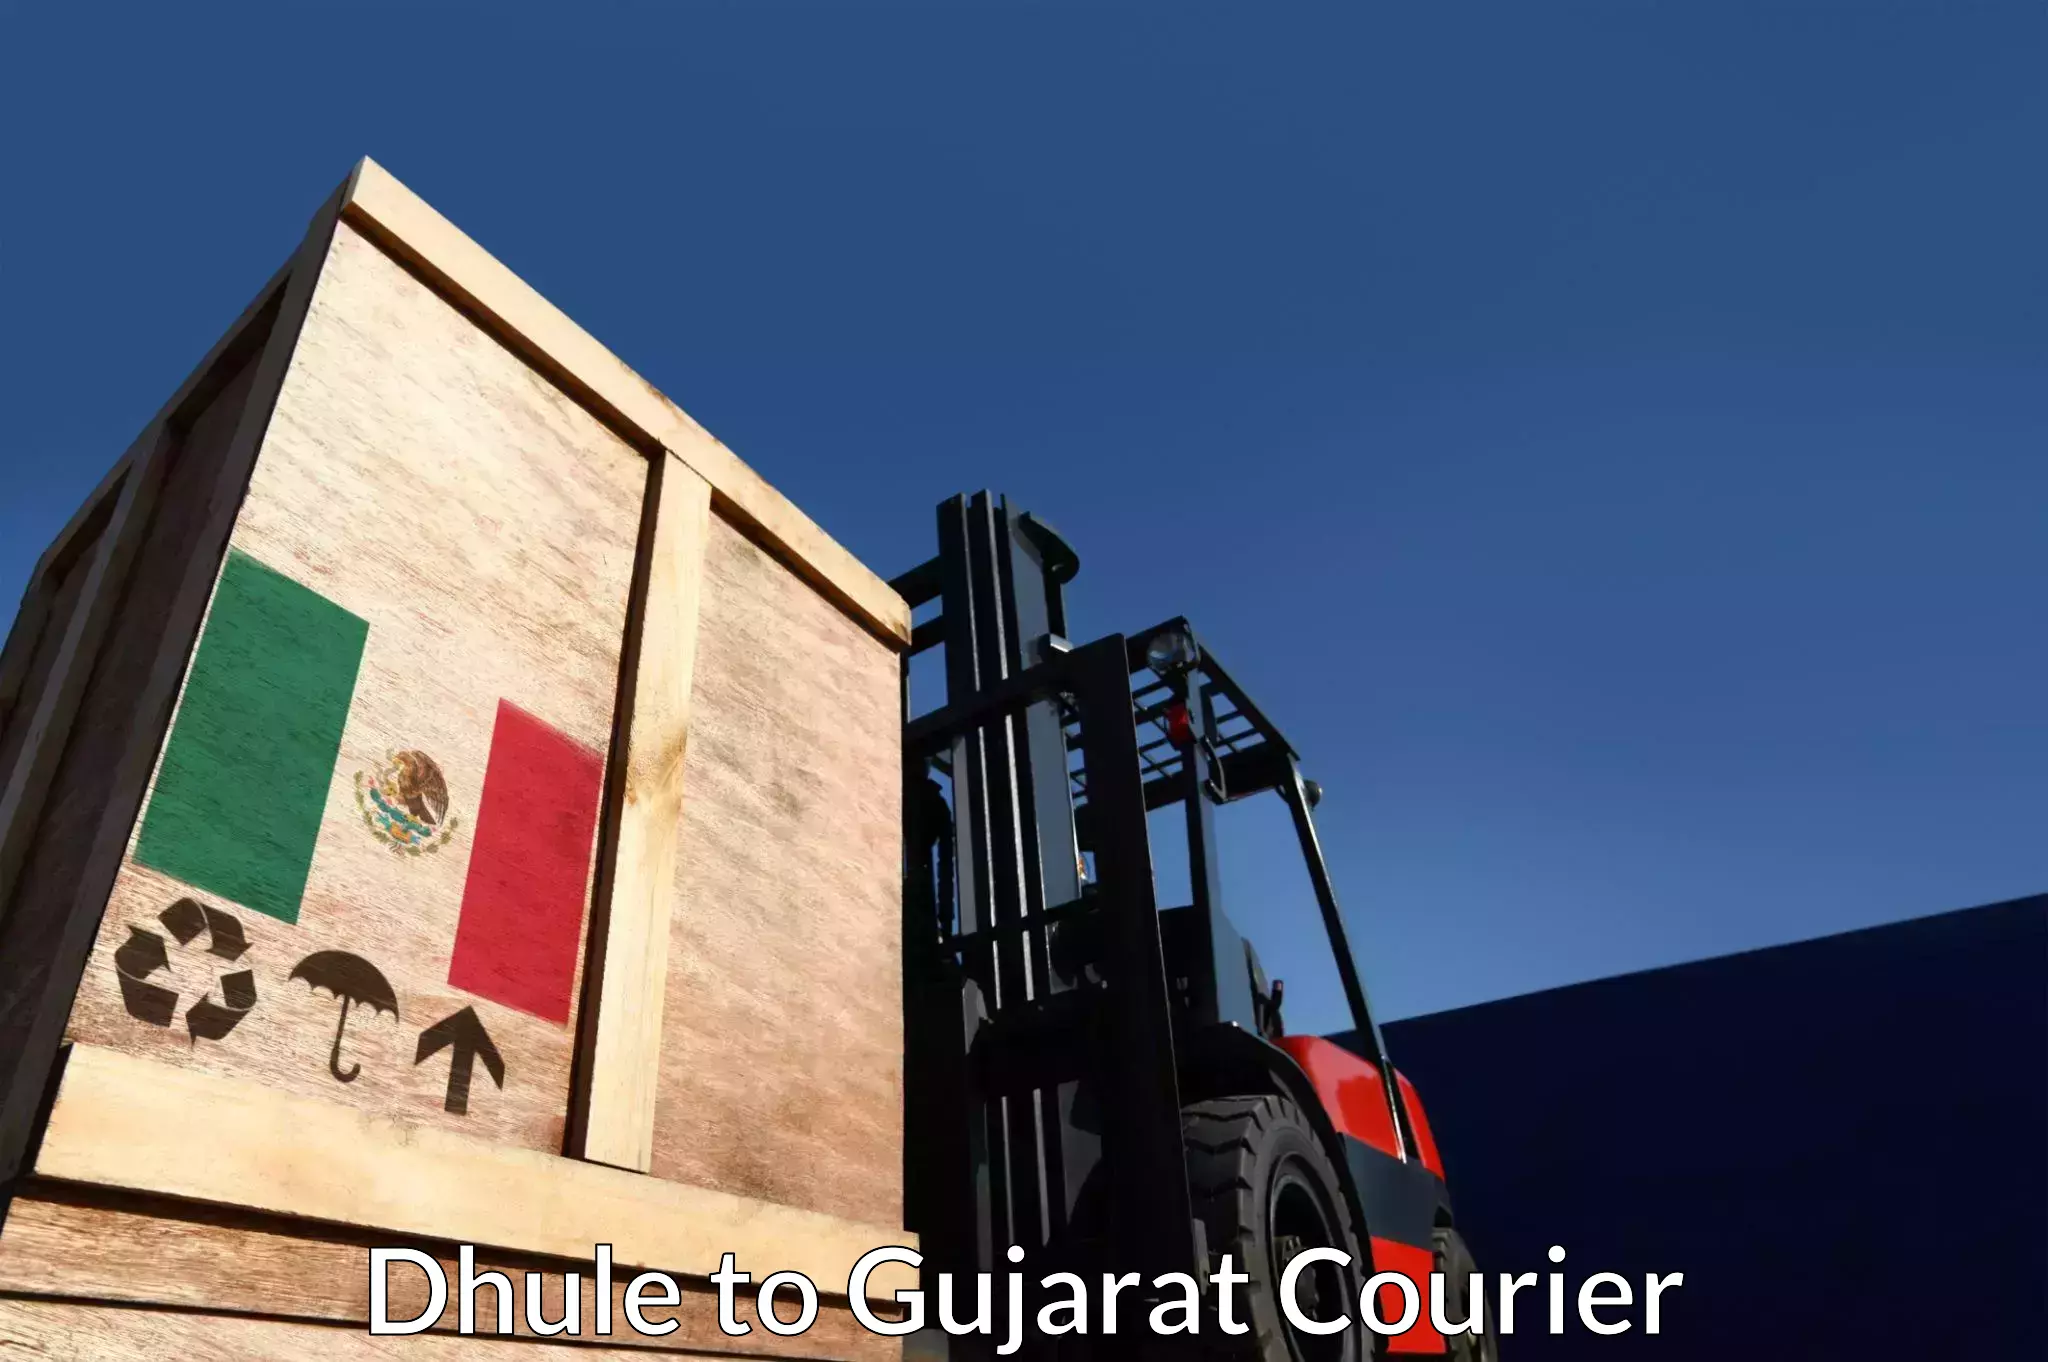 Courier service innovation Dhule to Kandla Port